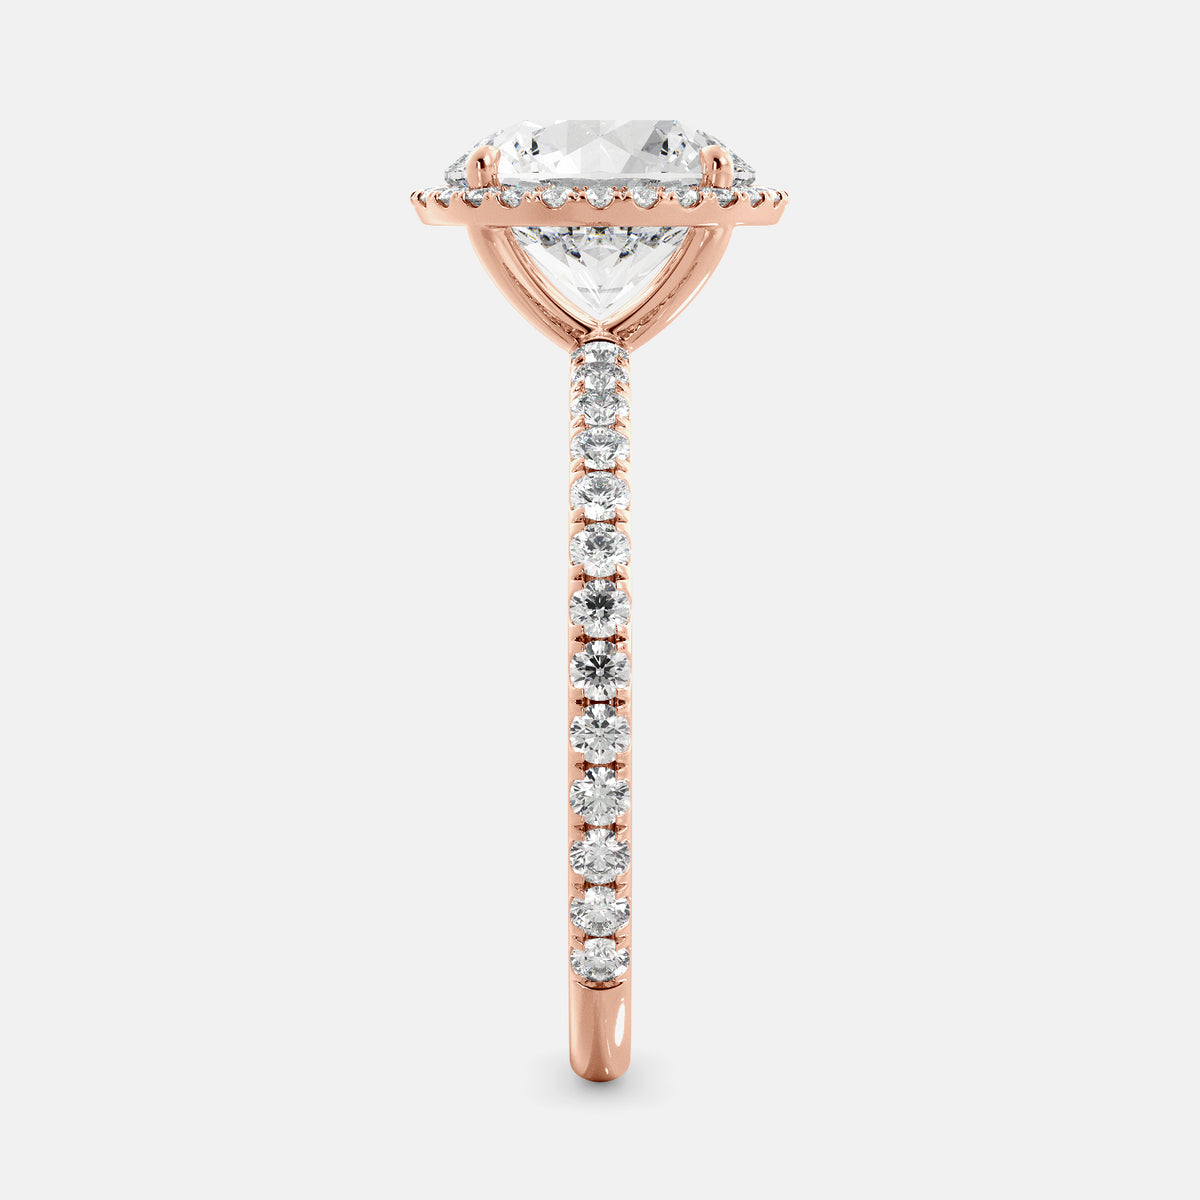 This image shows a beautiful round halo lab-diamond ring with pavé on a rose gold band. The ring features a round brilliant-cut lab-diamond in the center, surrounded by a halo of smaller diamonds. The band is pavé-set with smaller diamonds, creating a sparkling and elegant look. The ring is made of 14k rose gold and is available in a variety of sizes.